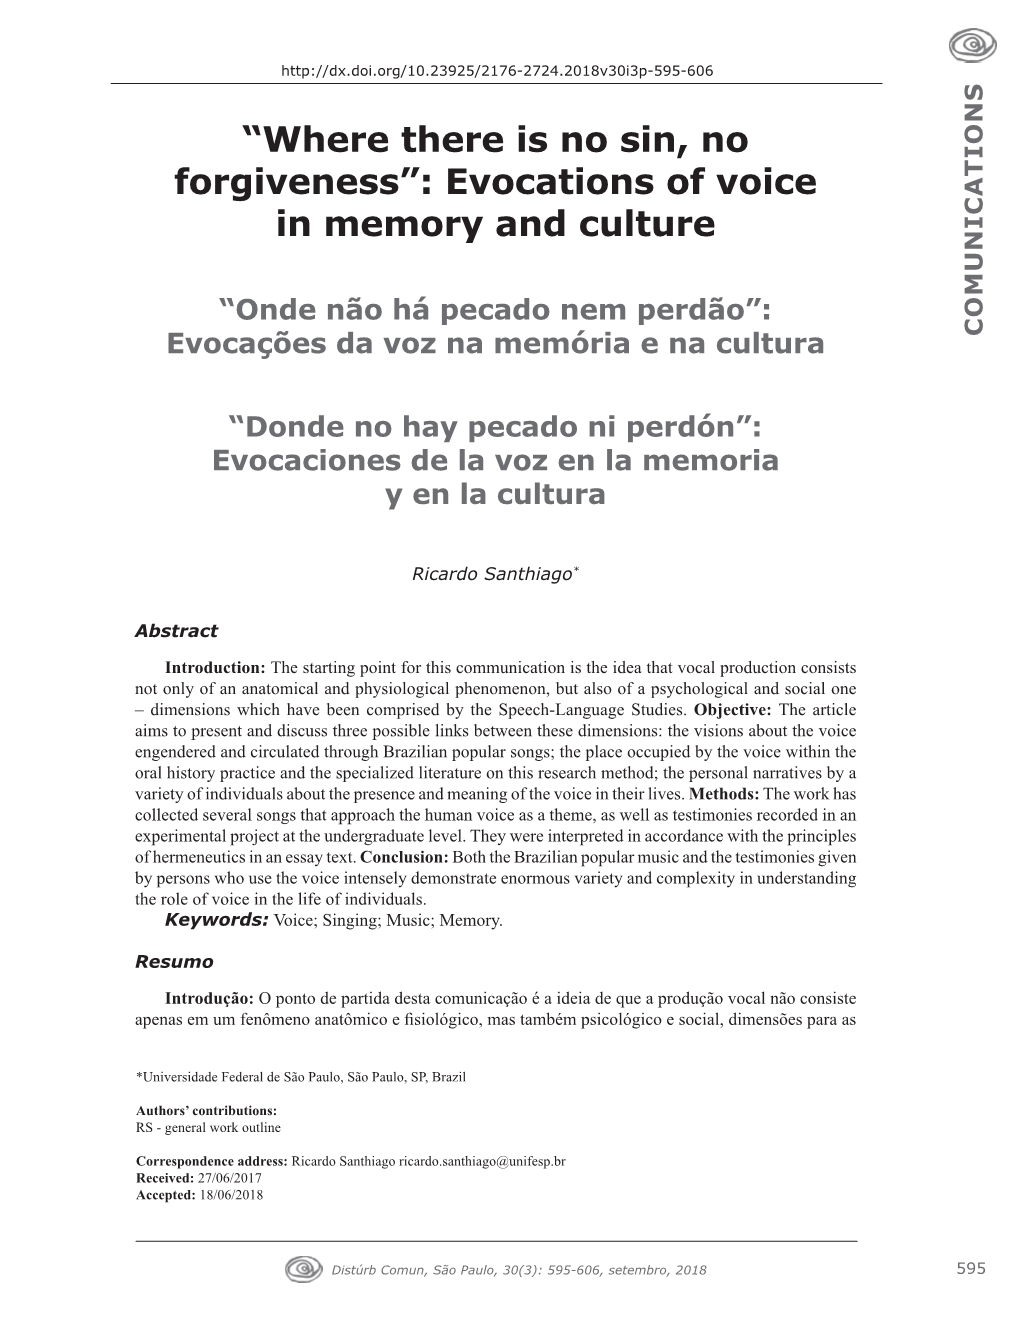 Evocations of Voice in Memory and Culture